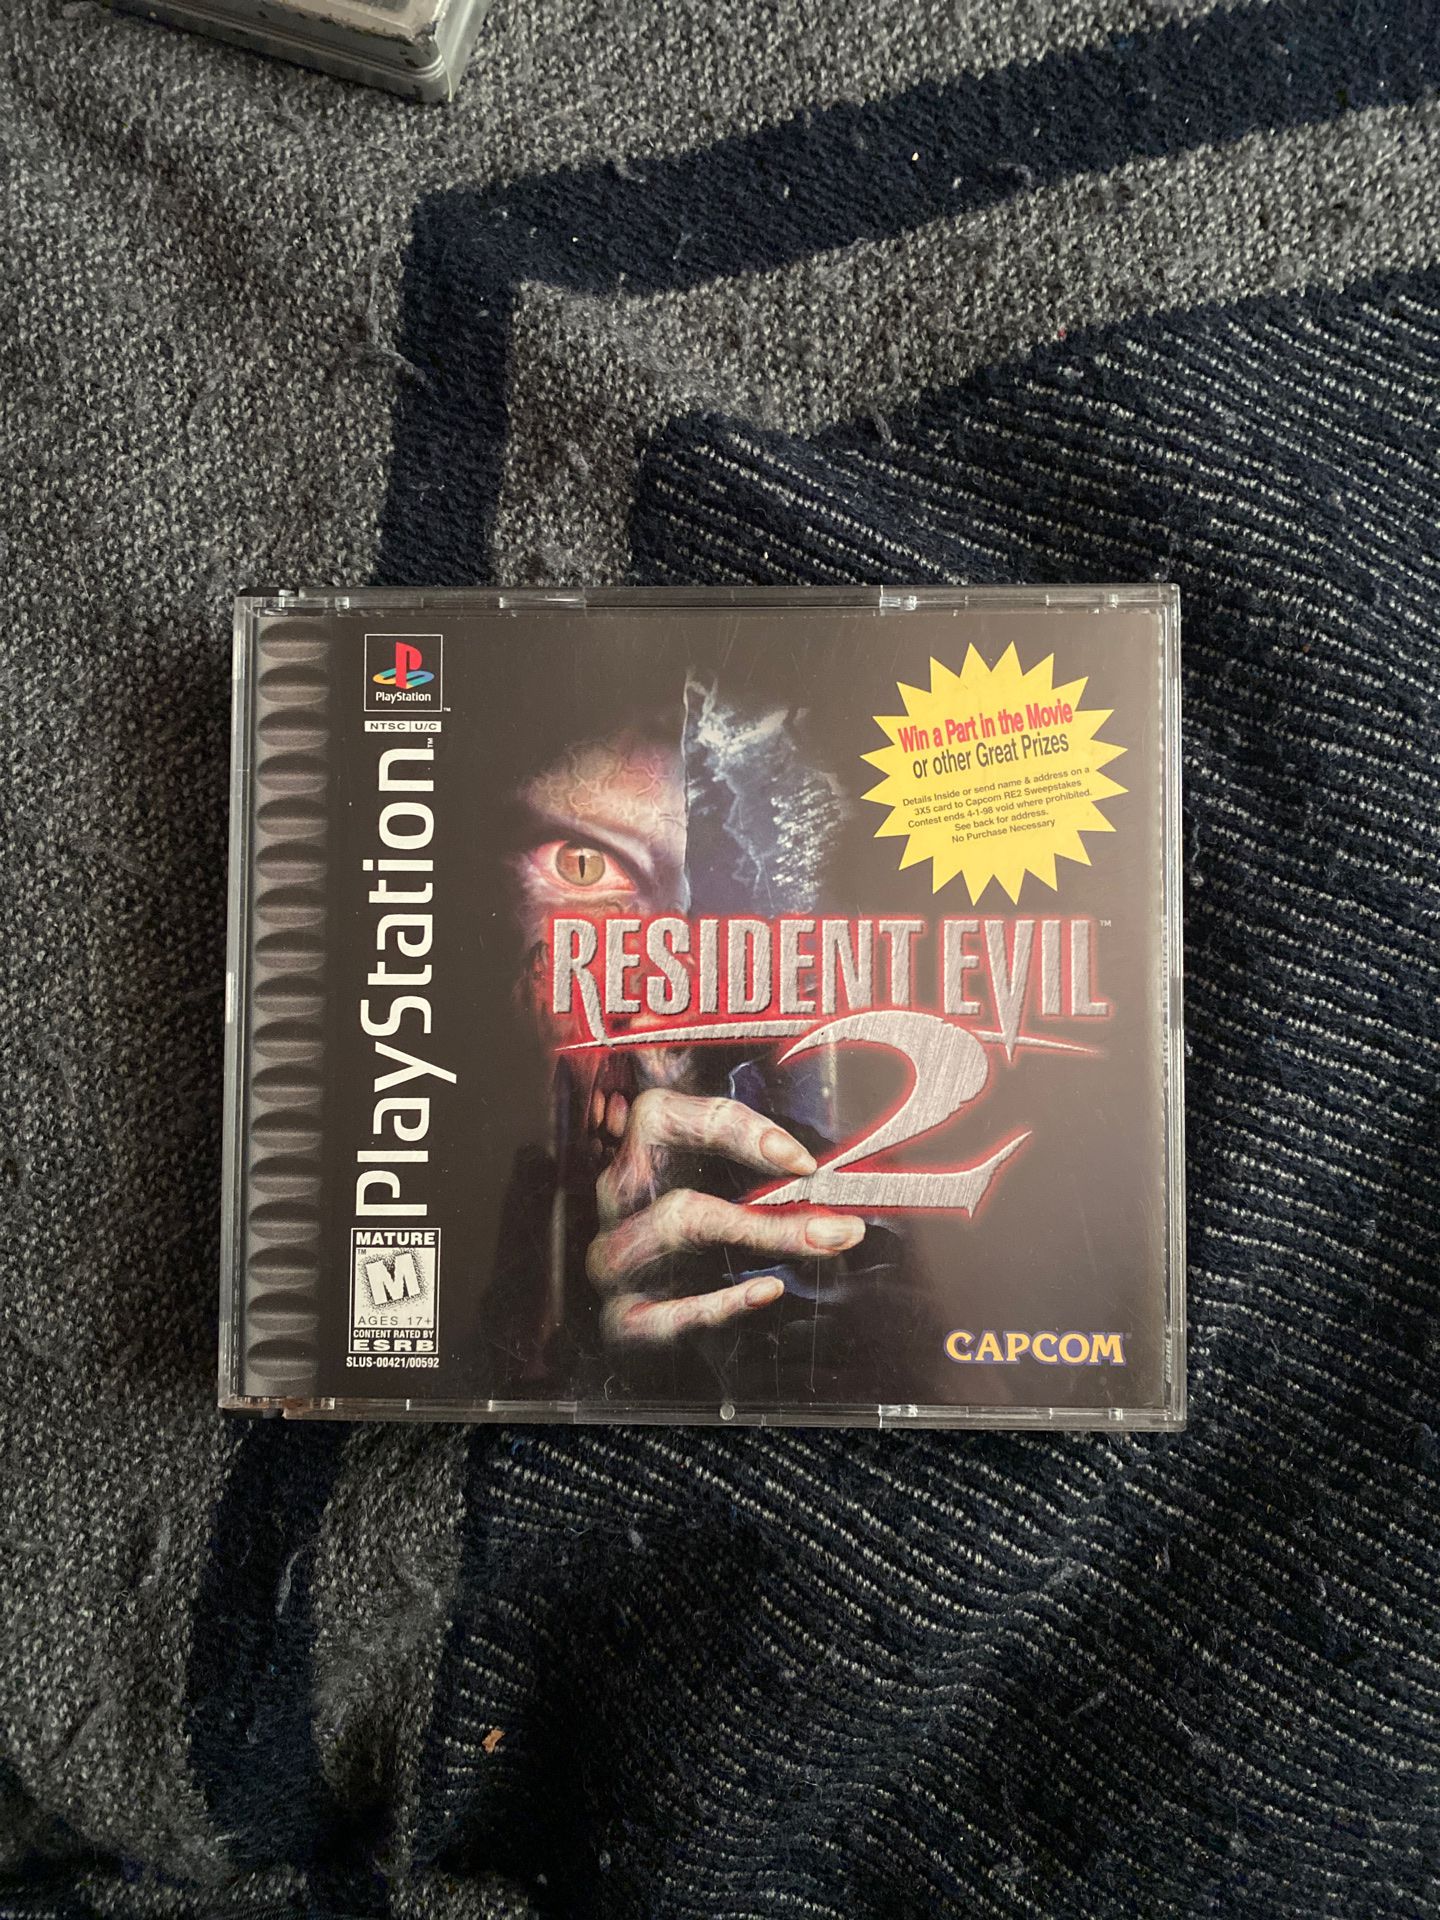 Resident evil 2 PlayStation 1 10/10 condition